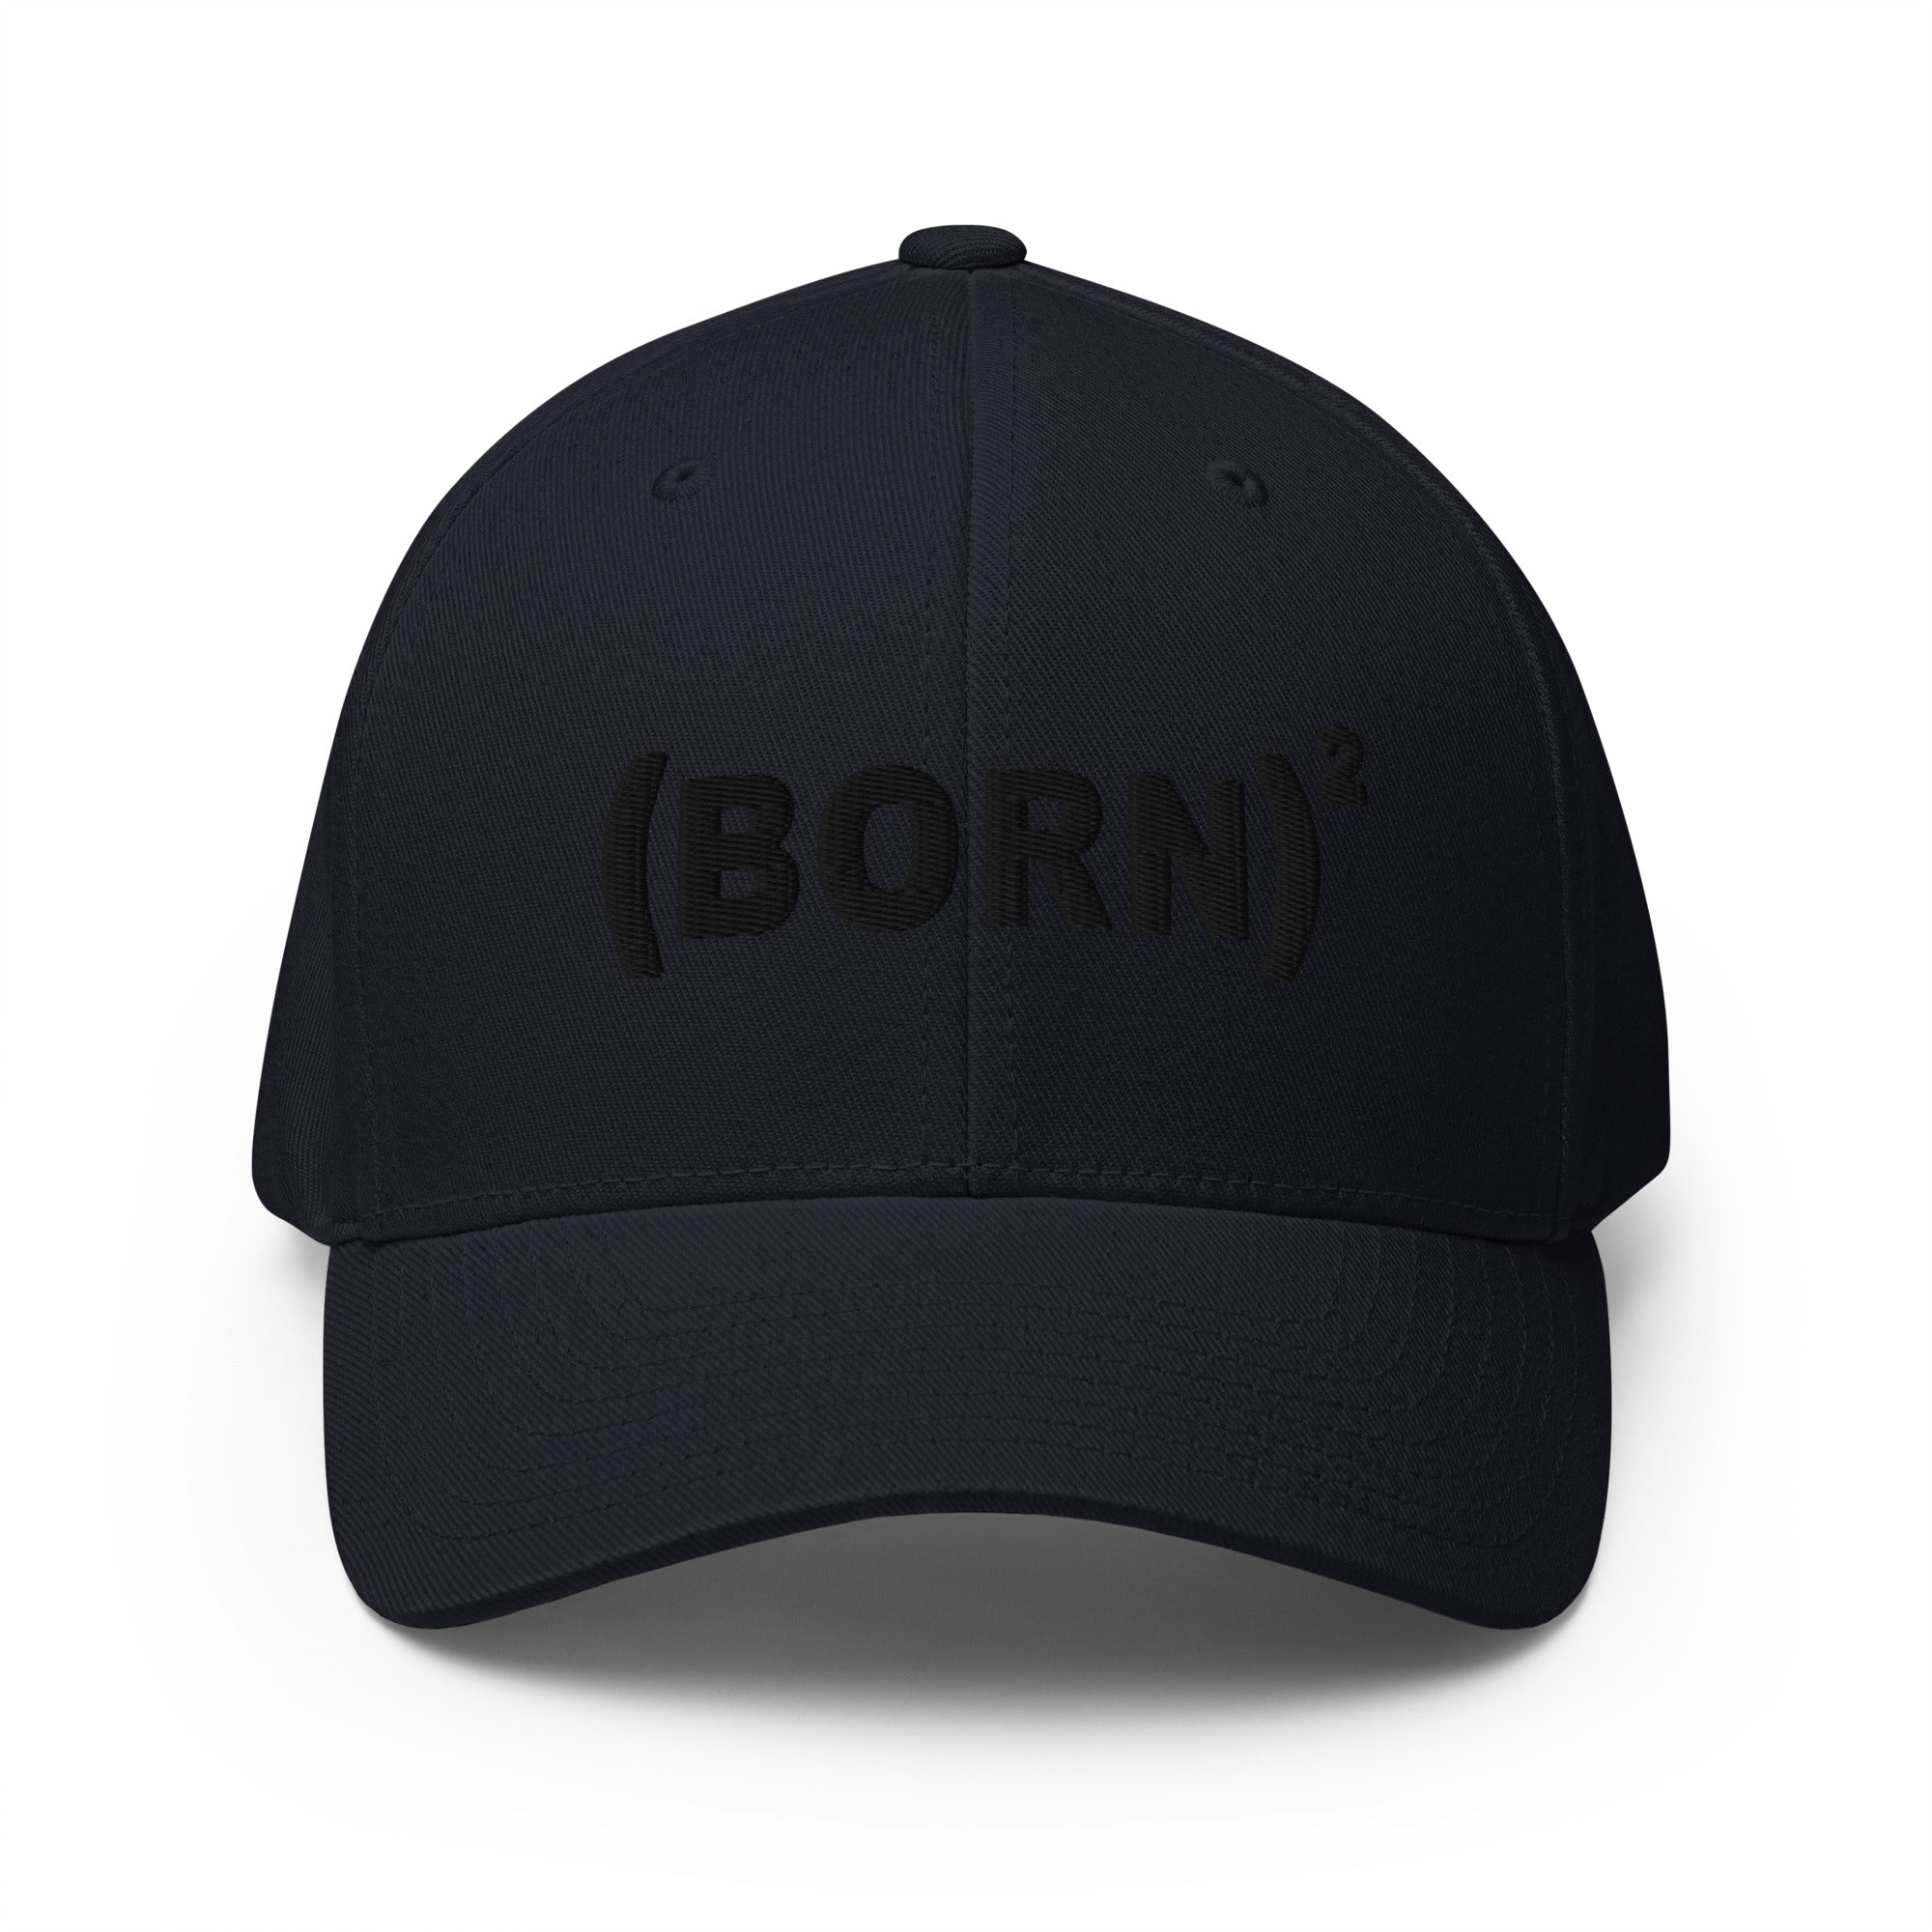 Born Again, Puff Black Embroidered Flex Fitted Cap - Christian Hat